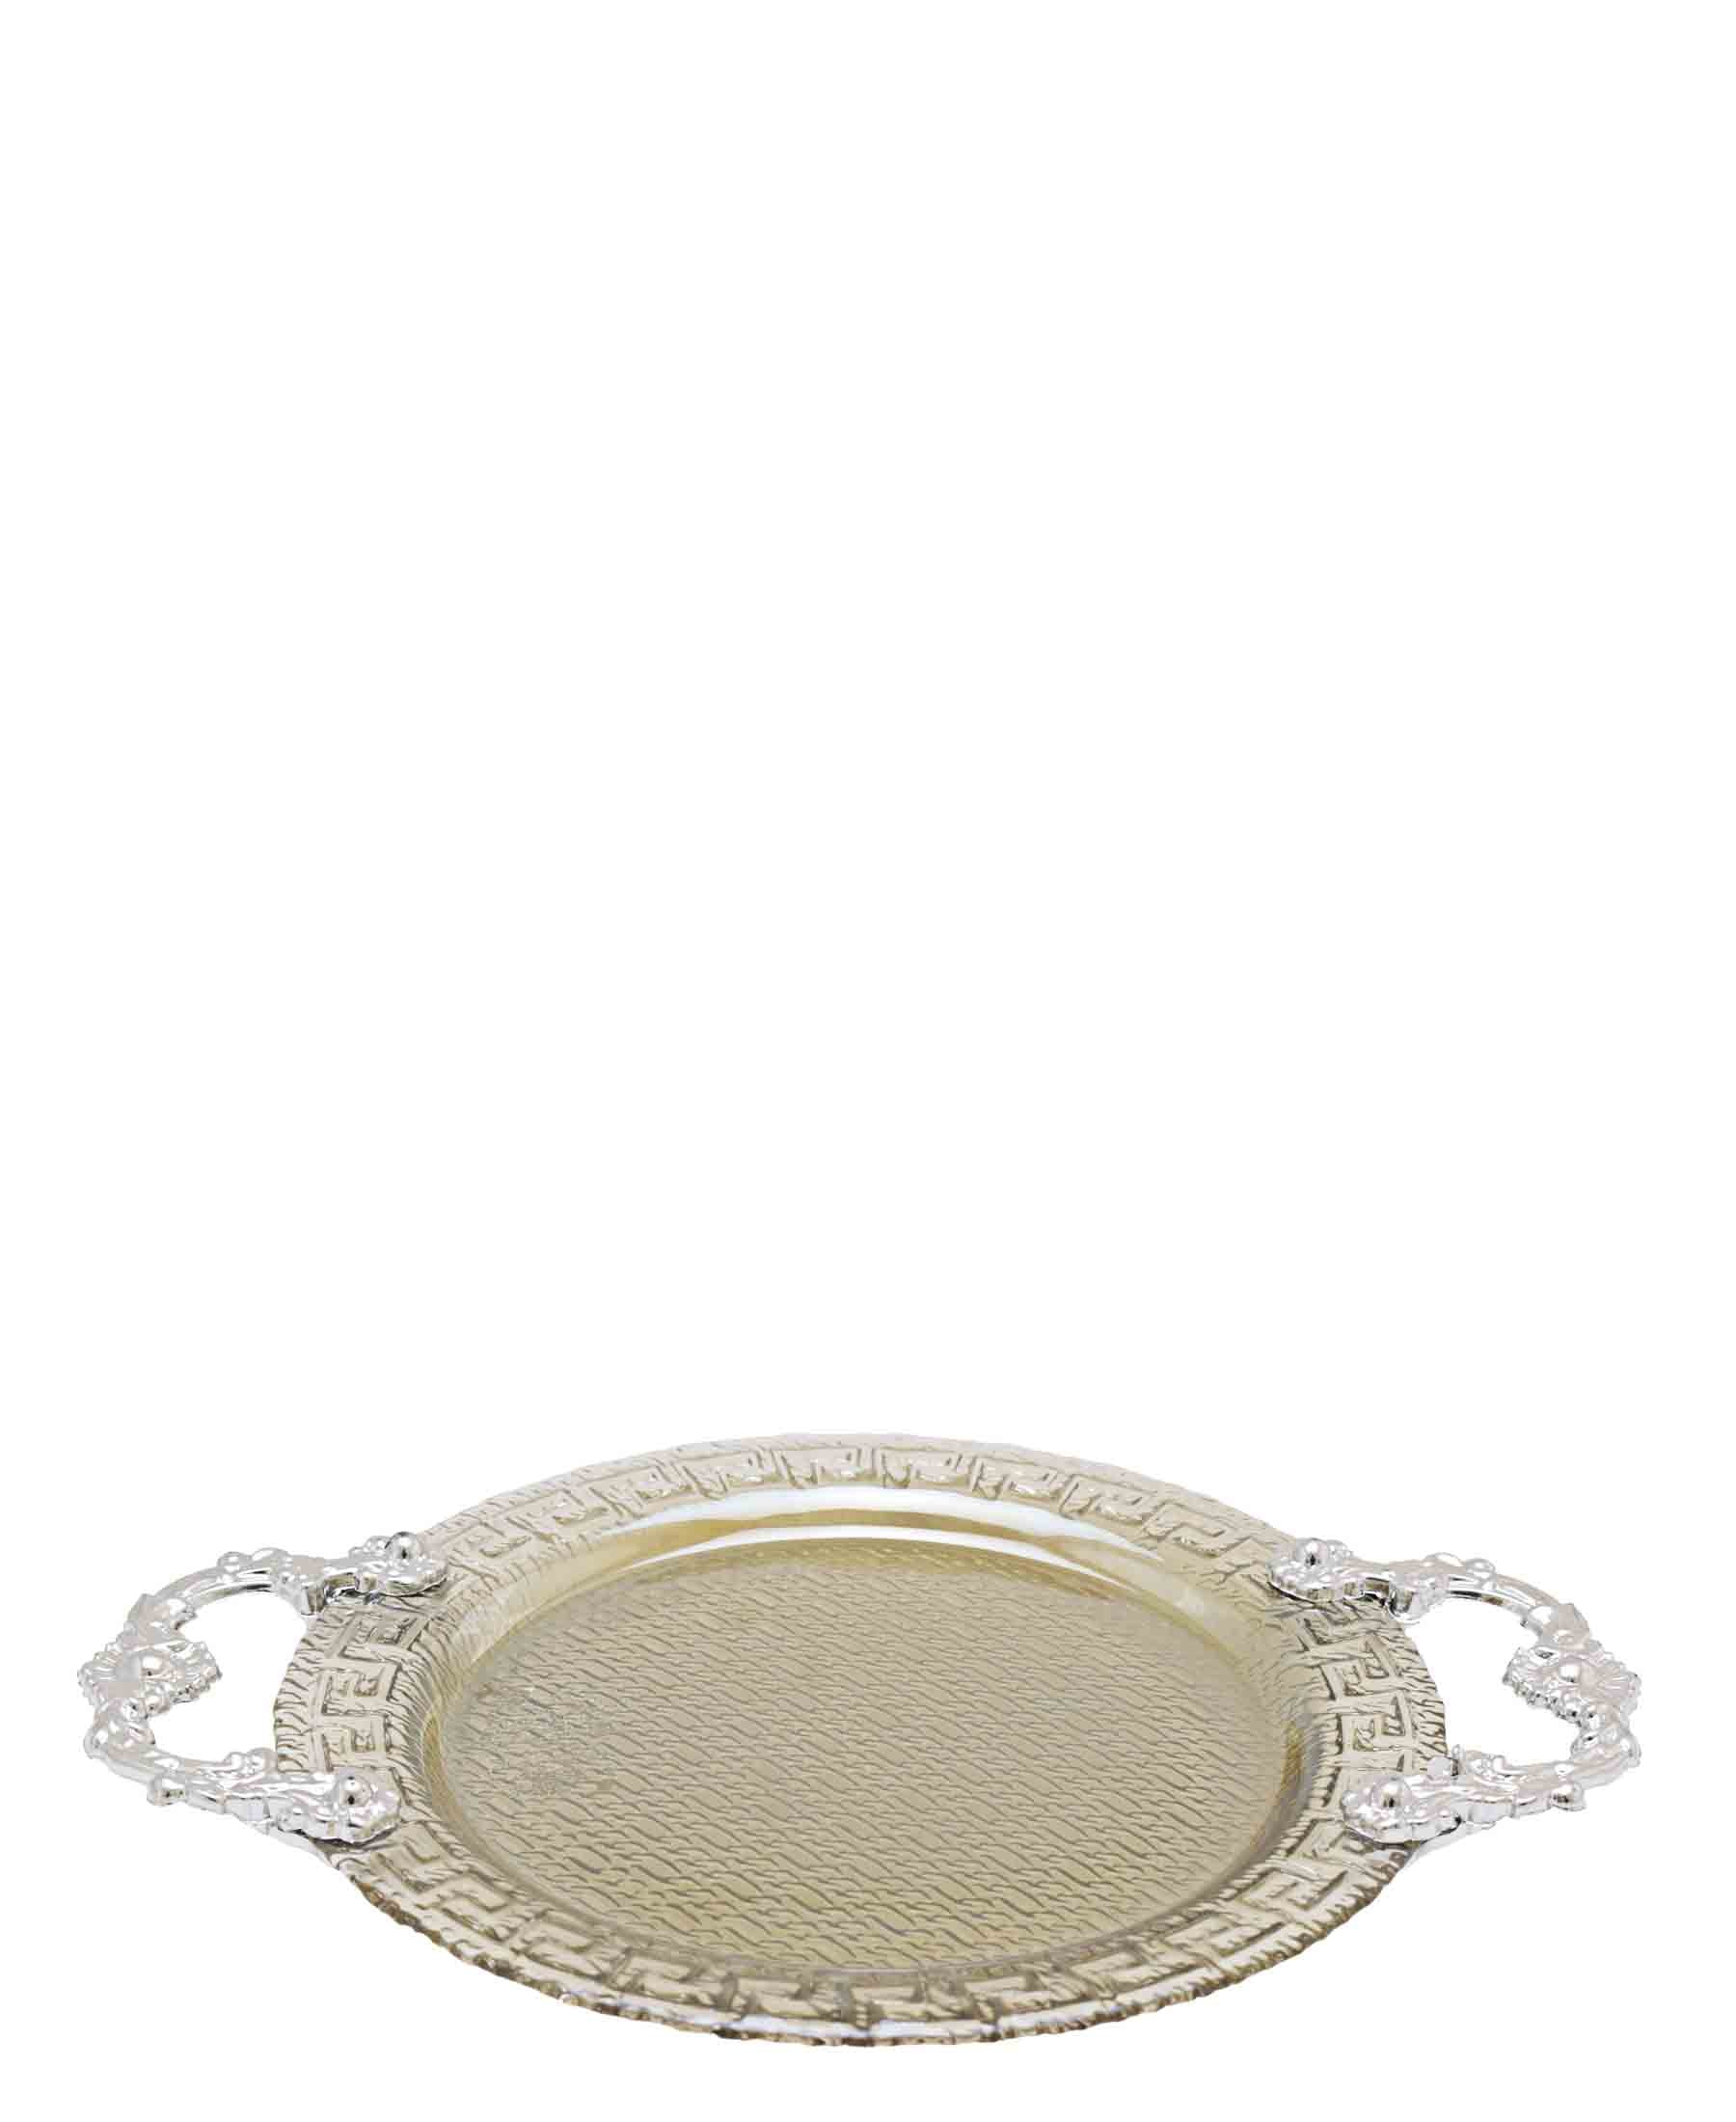 Bursa Collection Versace Glass Plate With Handles - Silver